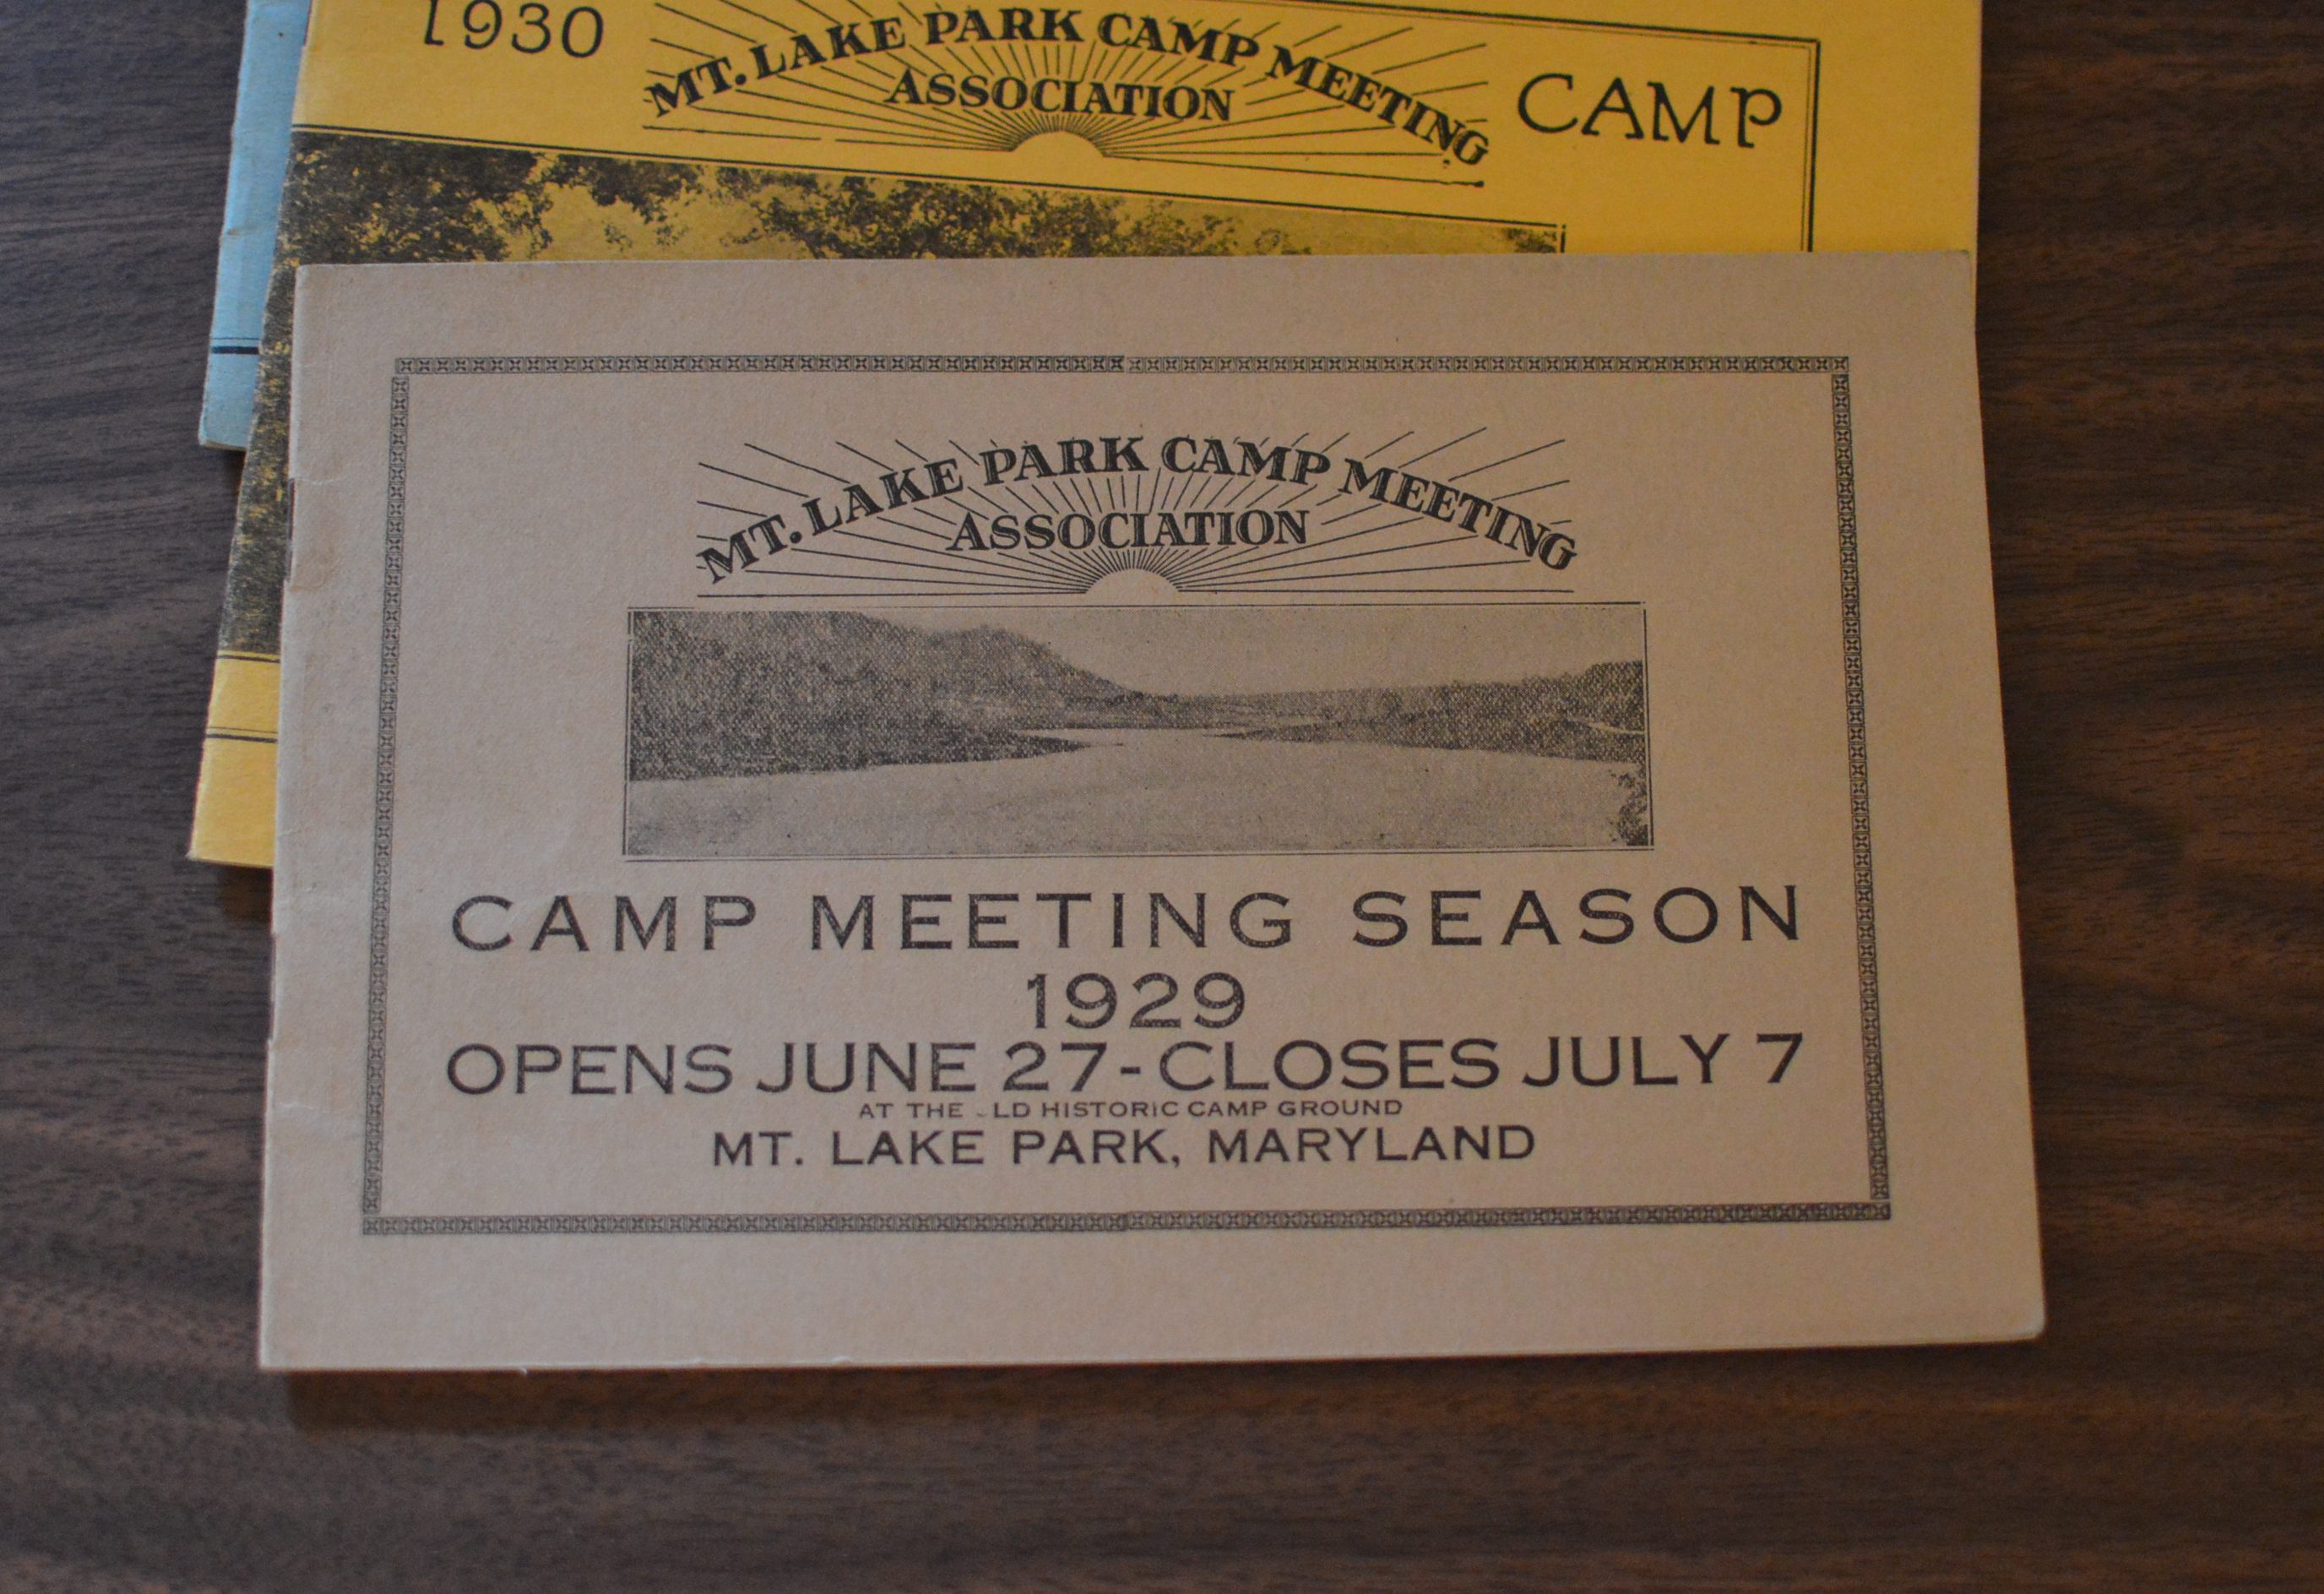 Cards which annouced the Mt. Park Camp Meeting Association's Camp Meeting Season were on display in the Mountain Park Lake Museum during Chautauqua, Then & Now. (Anthony C. Hayes)